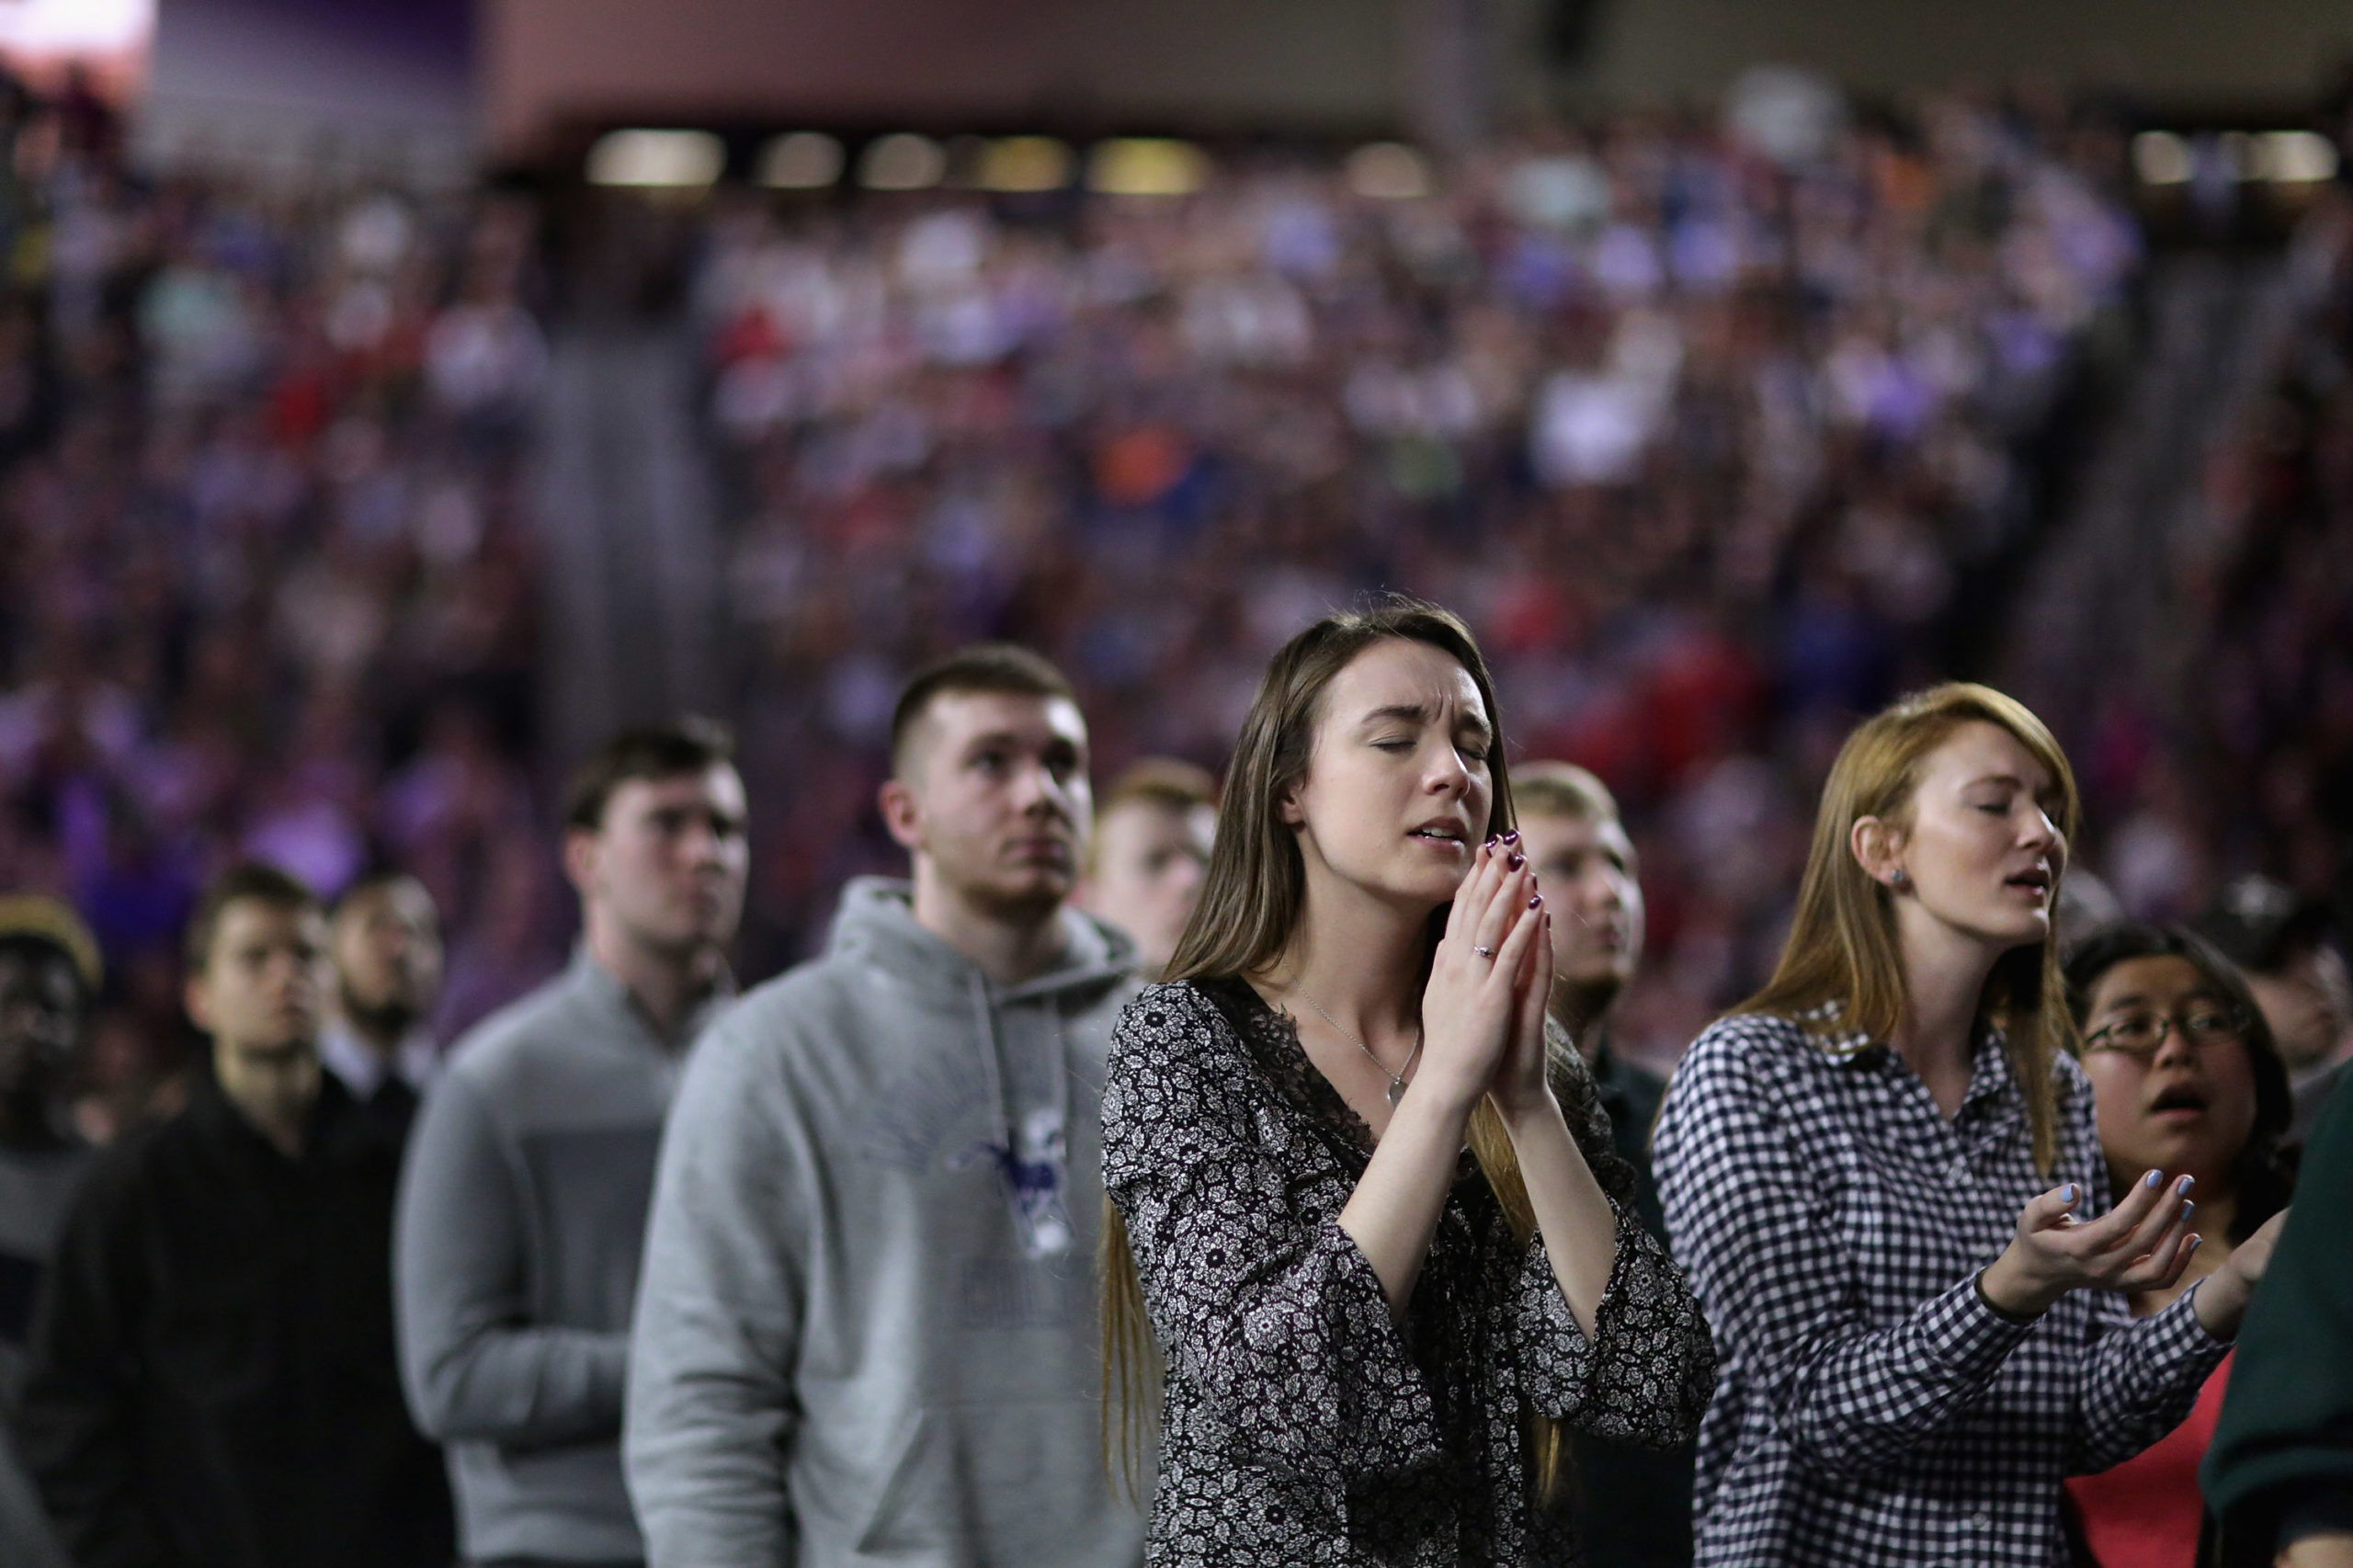 Thousands of students, supporters and invited guests sing songs of Christian praise before Republican presidential candidate Donald Trump delivers the convocation in the Vines Center on the campus of Liberty University January 18, 2016 in Lynchburg, Virginia.